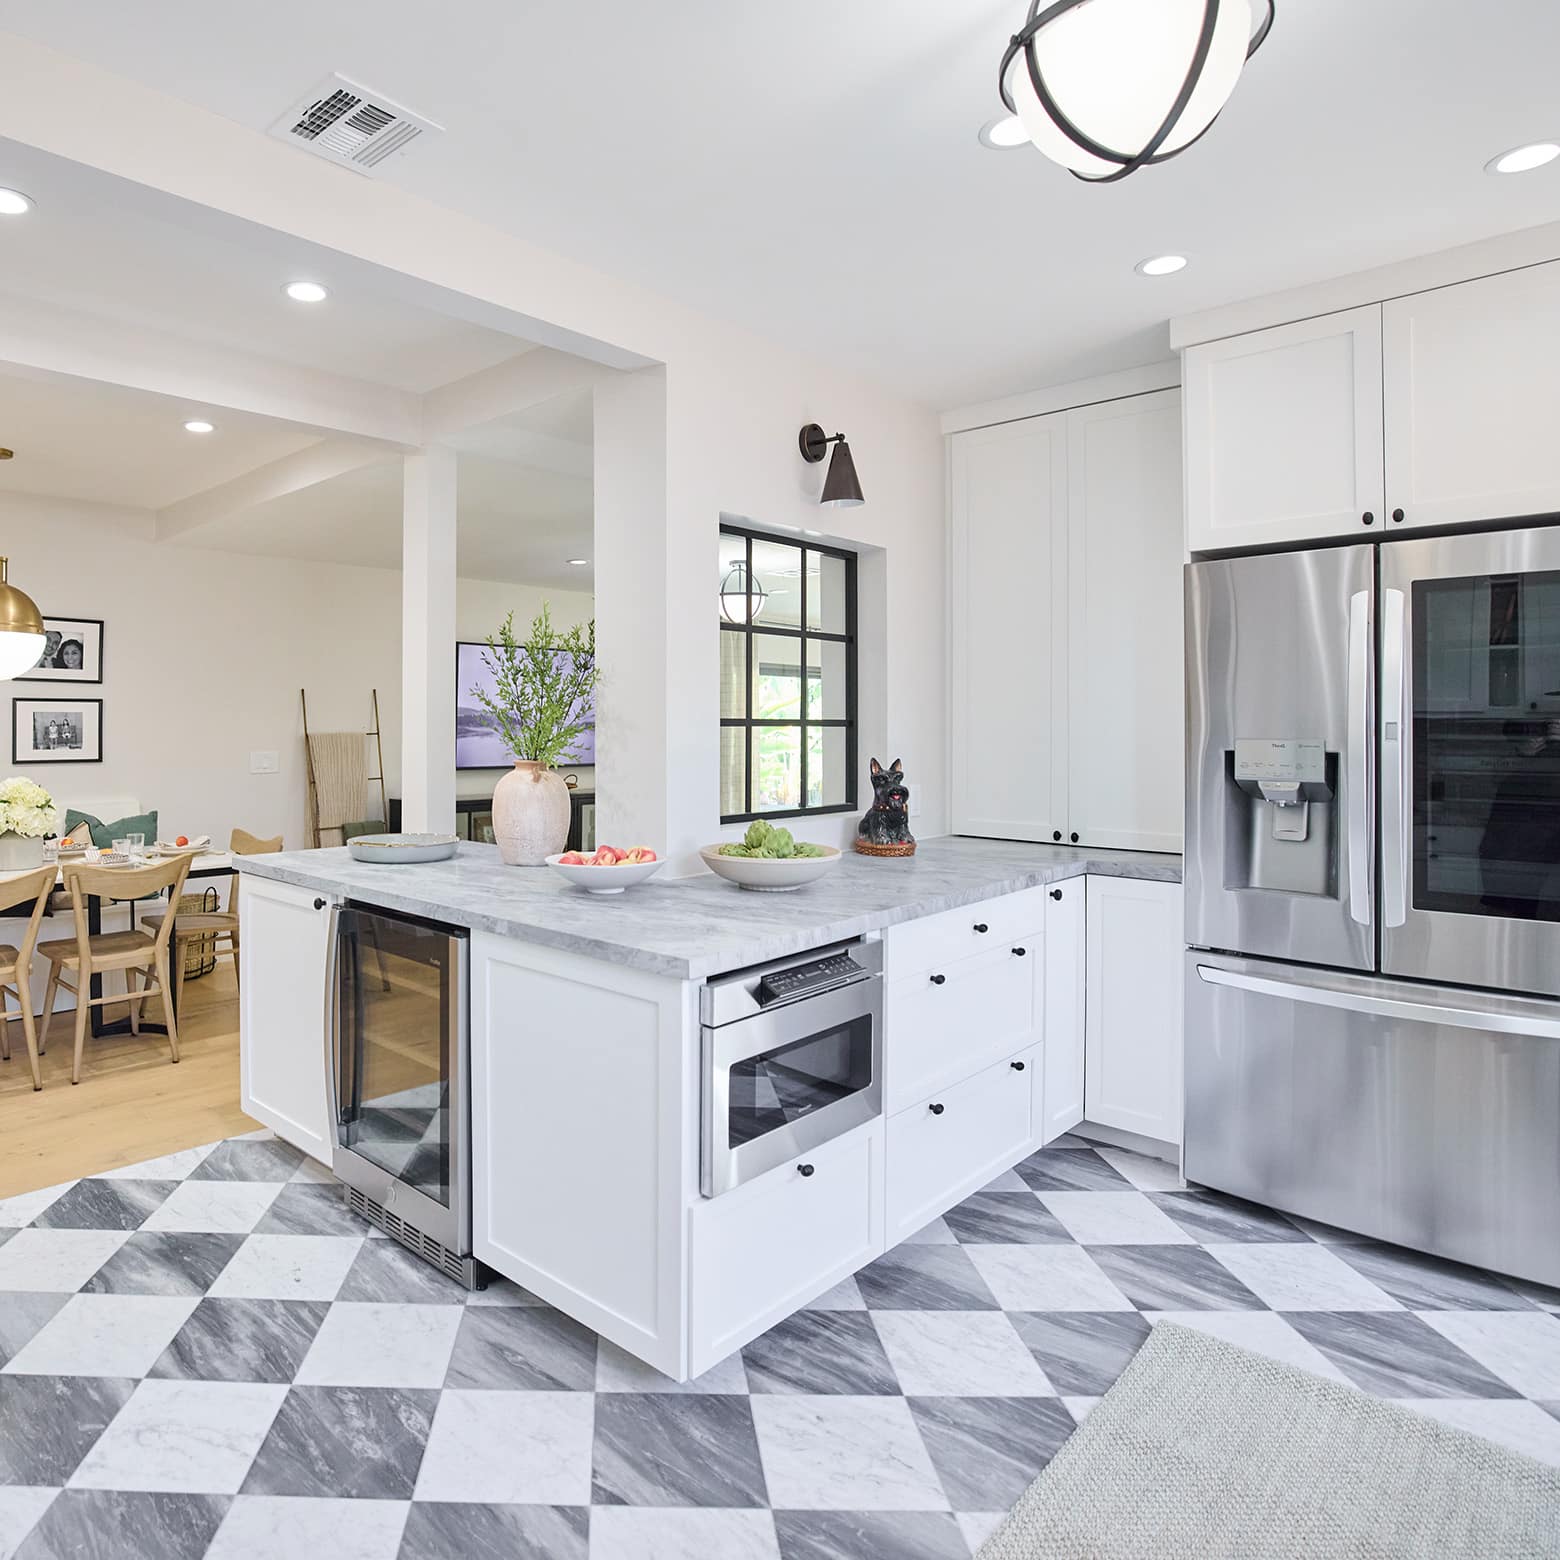 kitchen decorating idea with gray tiled floors